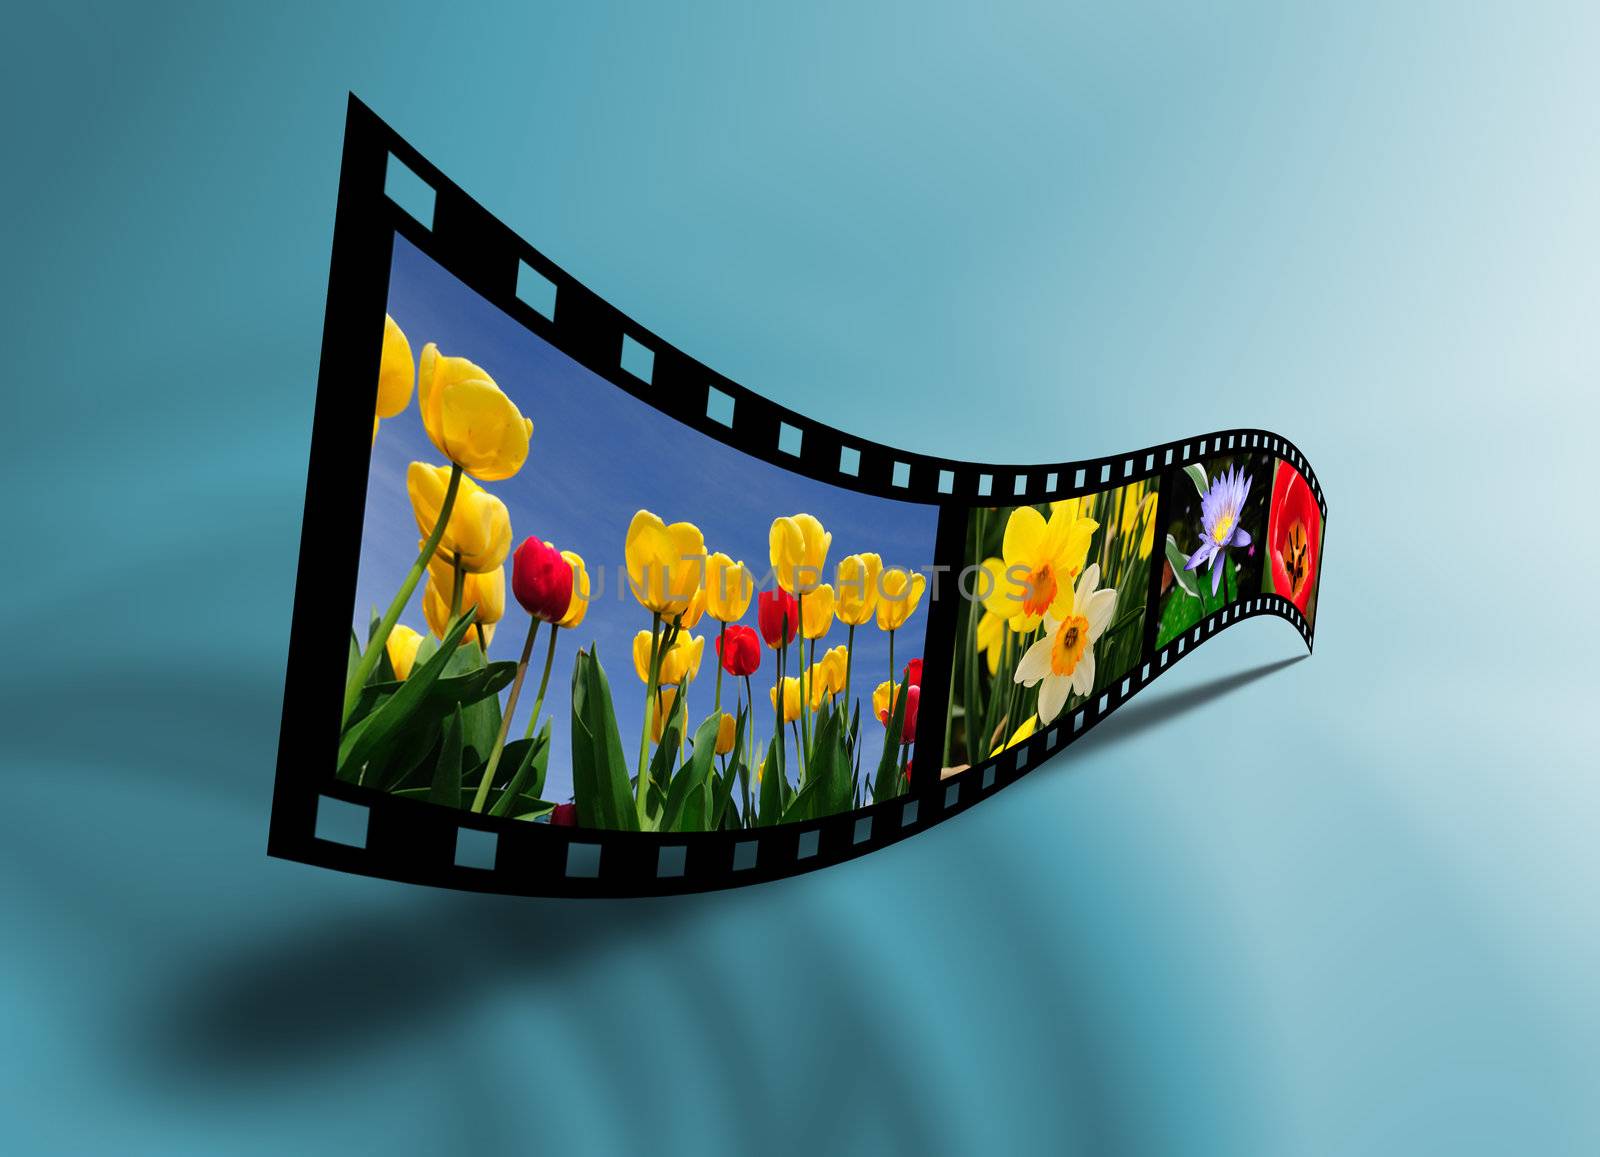 Beautiful flowers photography in a 3 dimensional film strip